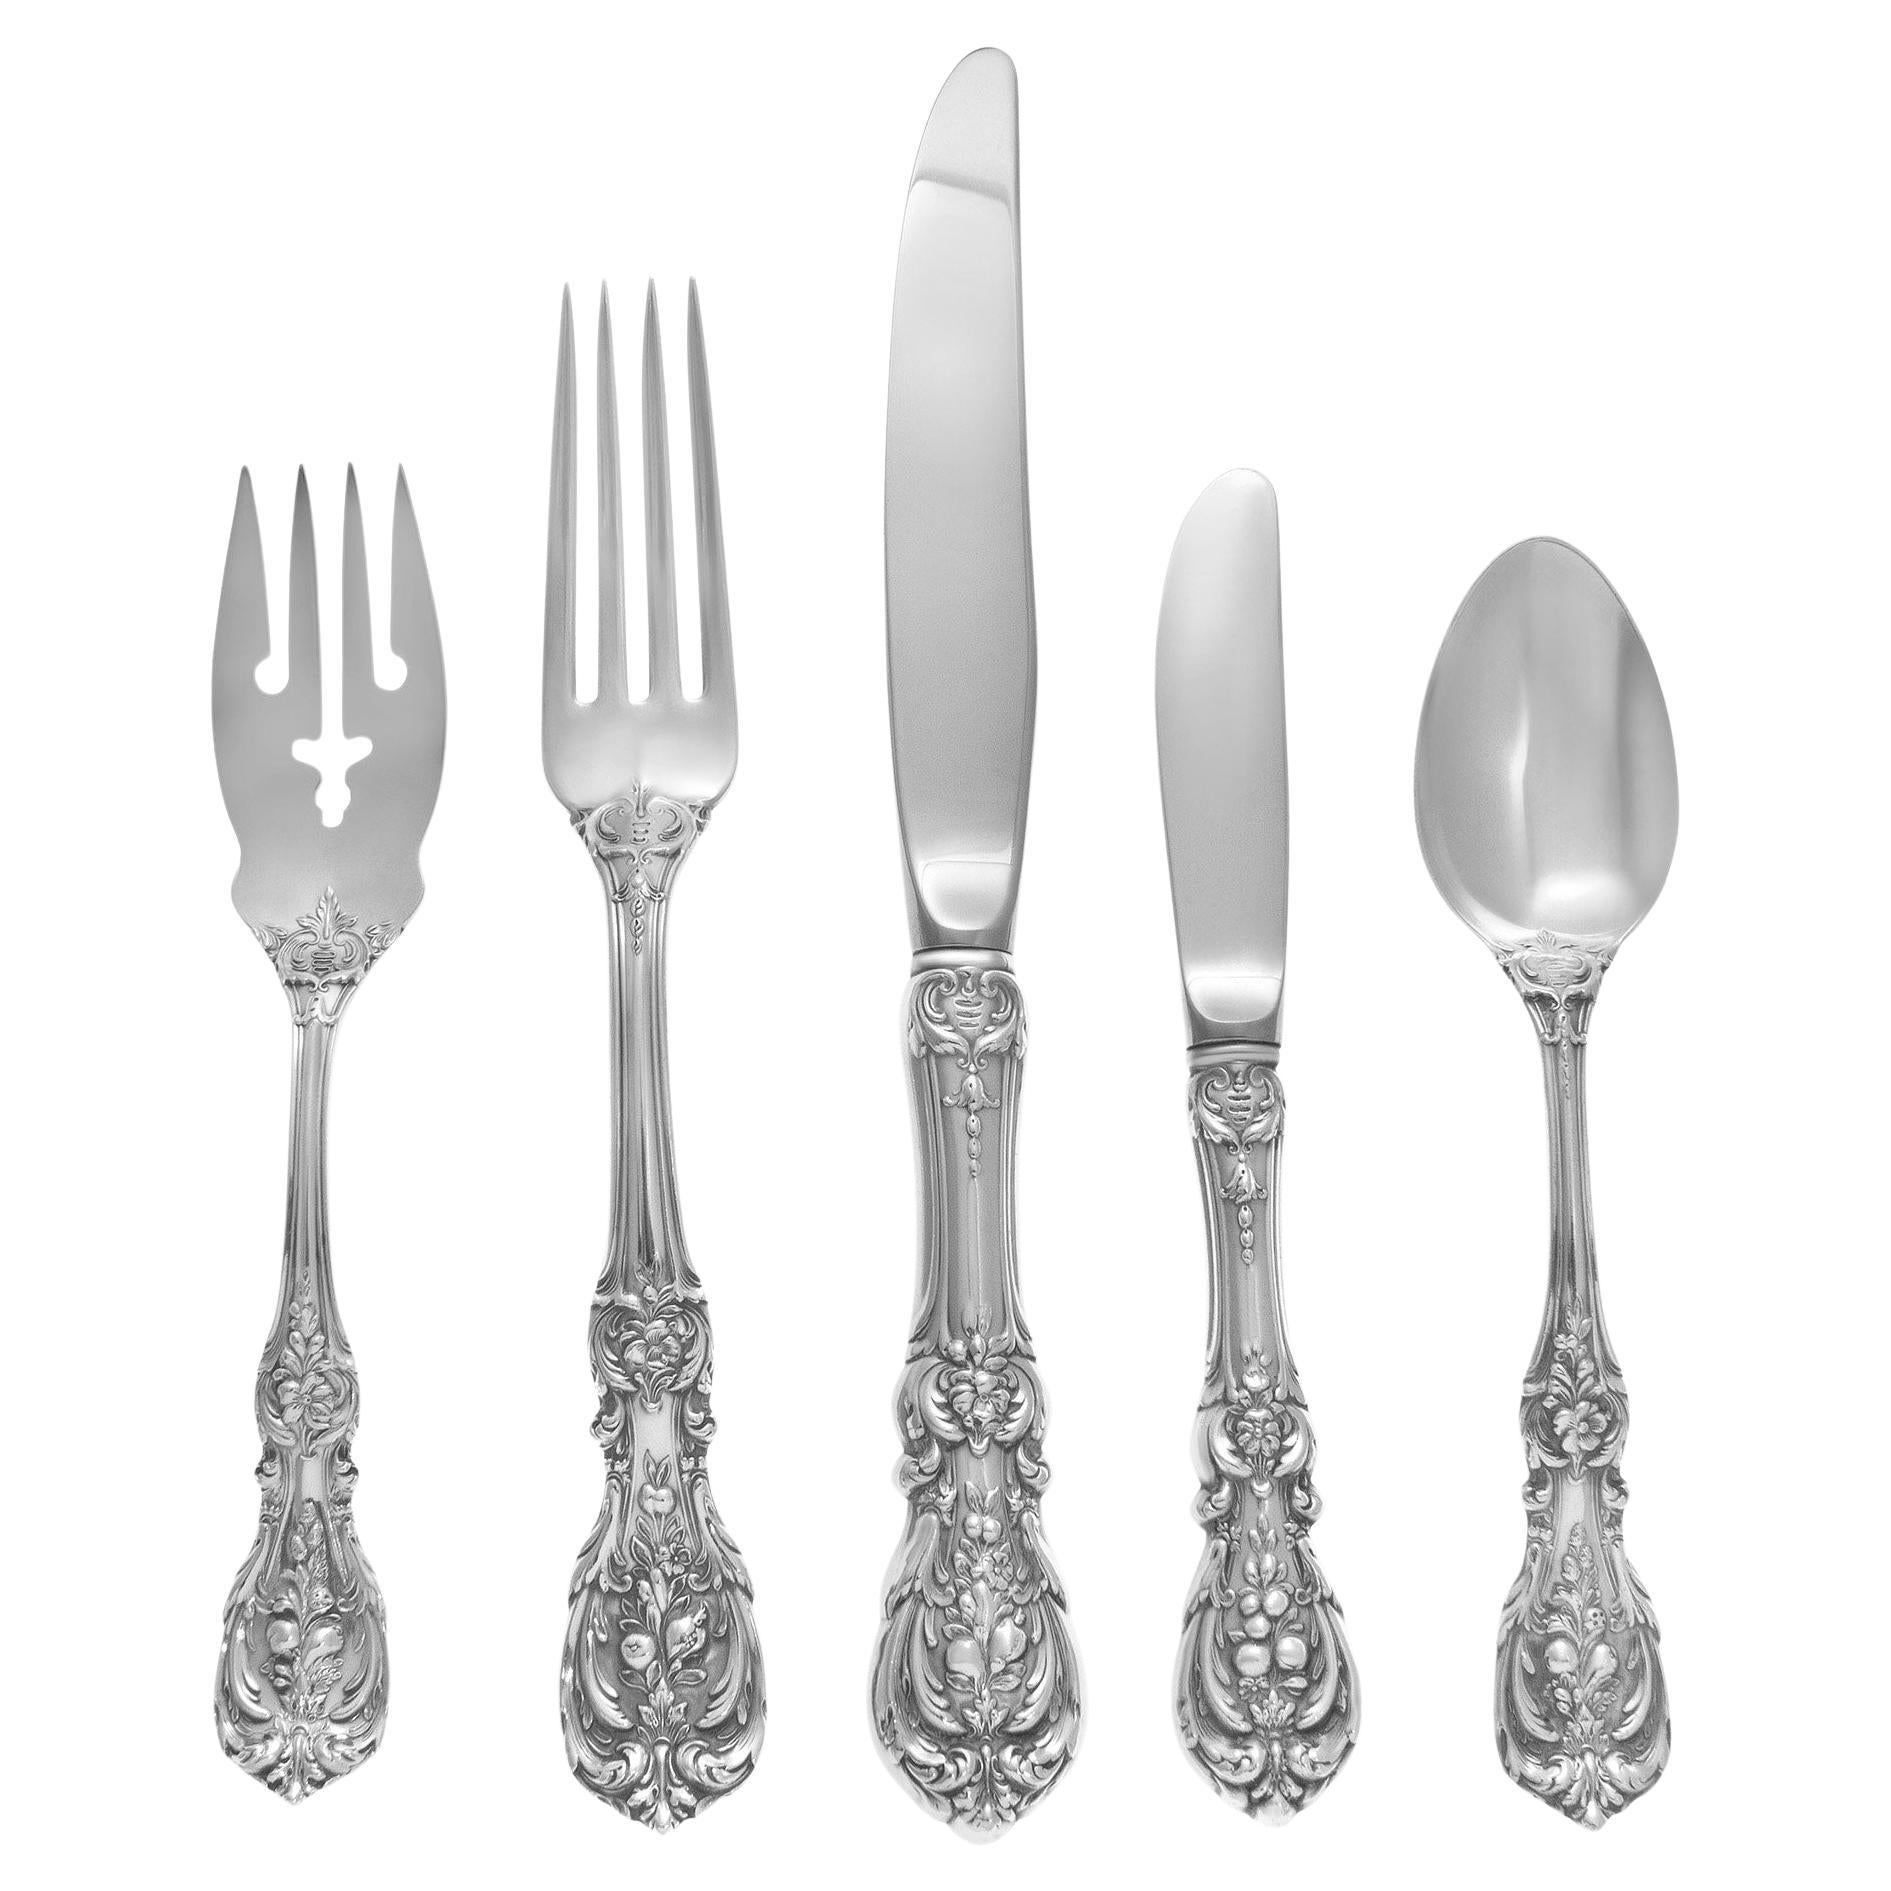 Francis the First Sterling Silver Flatware Set Patented in 1907 by Reed & Barton